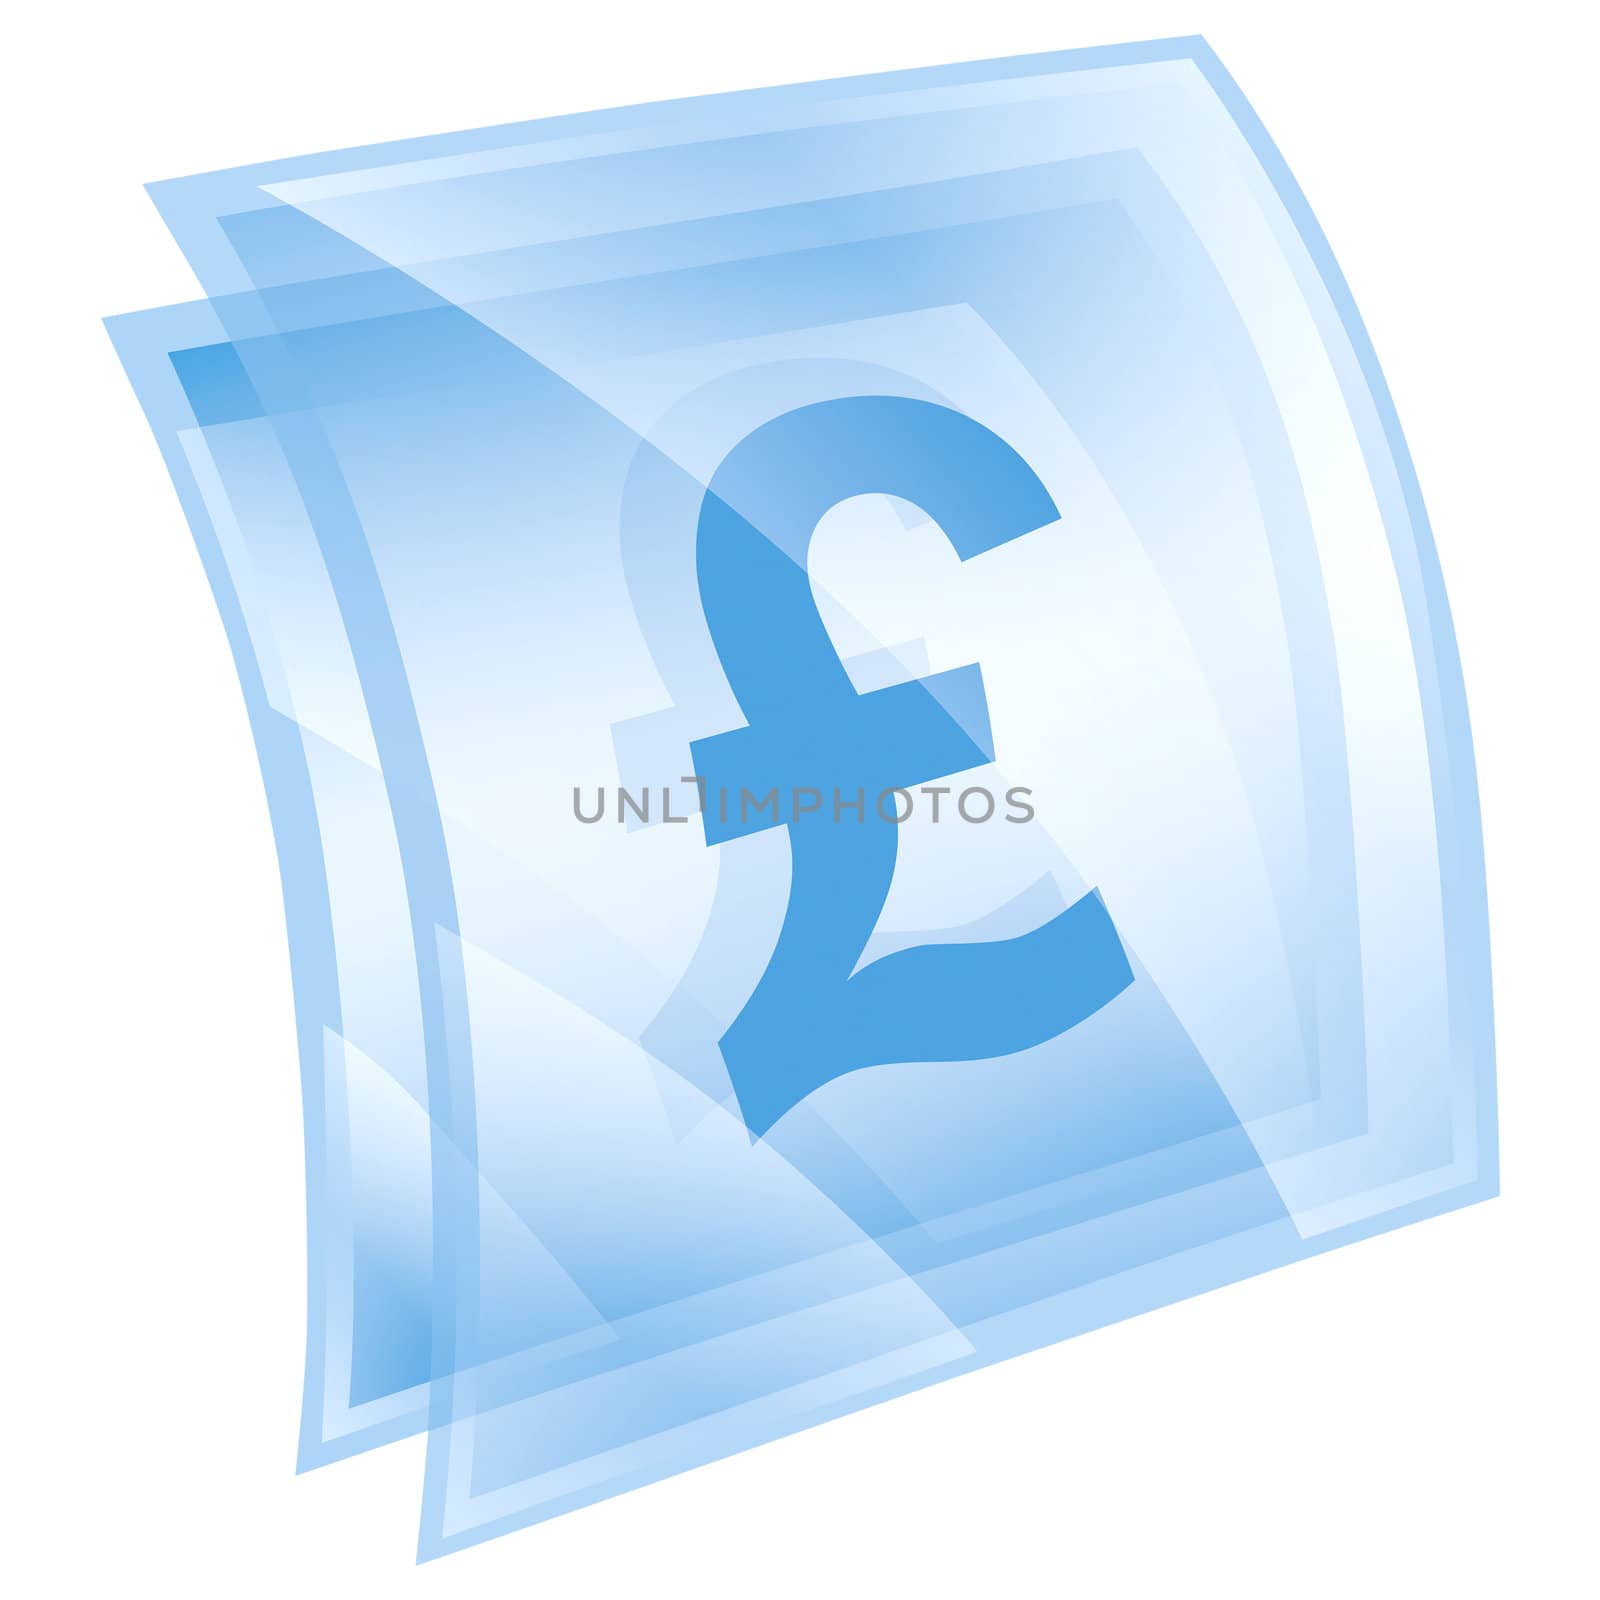 Pound icon blue square, isolated on white background by zeffss